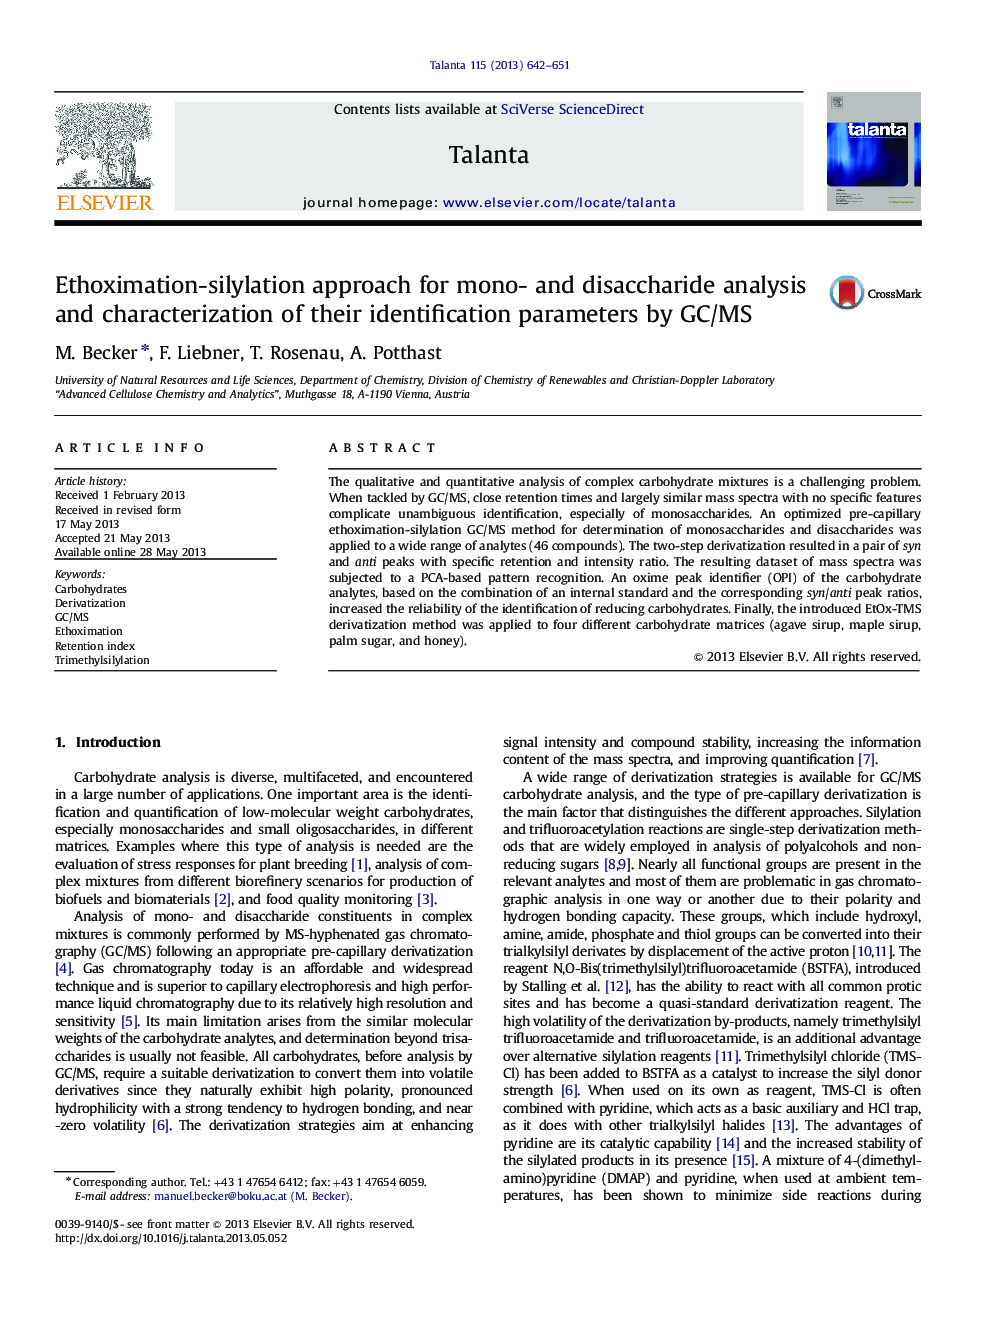 Ethoximation-silylation approach for mono- and disaccharide analysis and characterization of their identification parameters by GC/MS